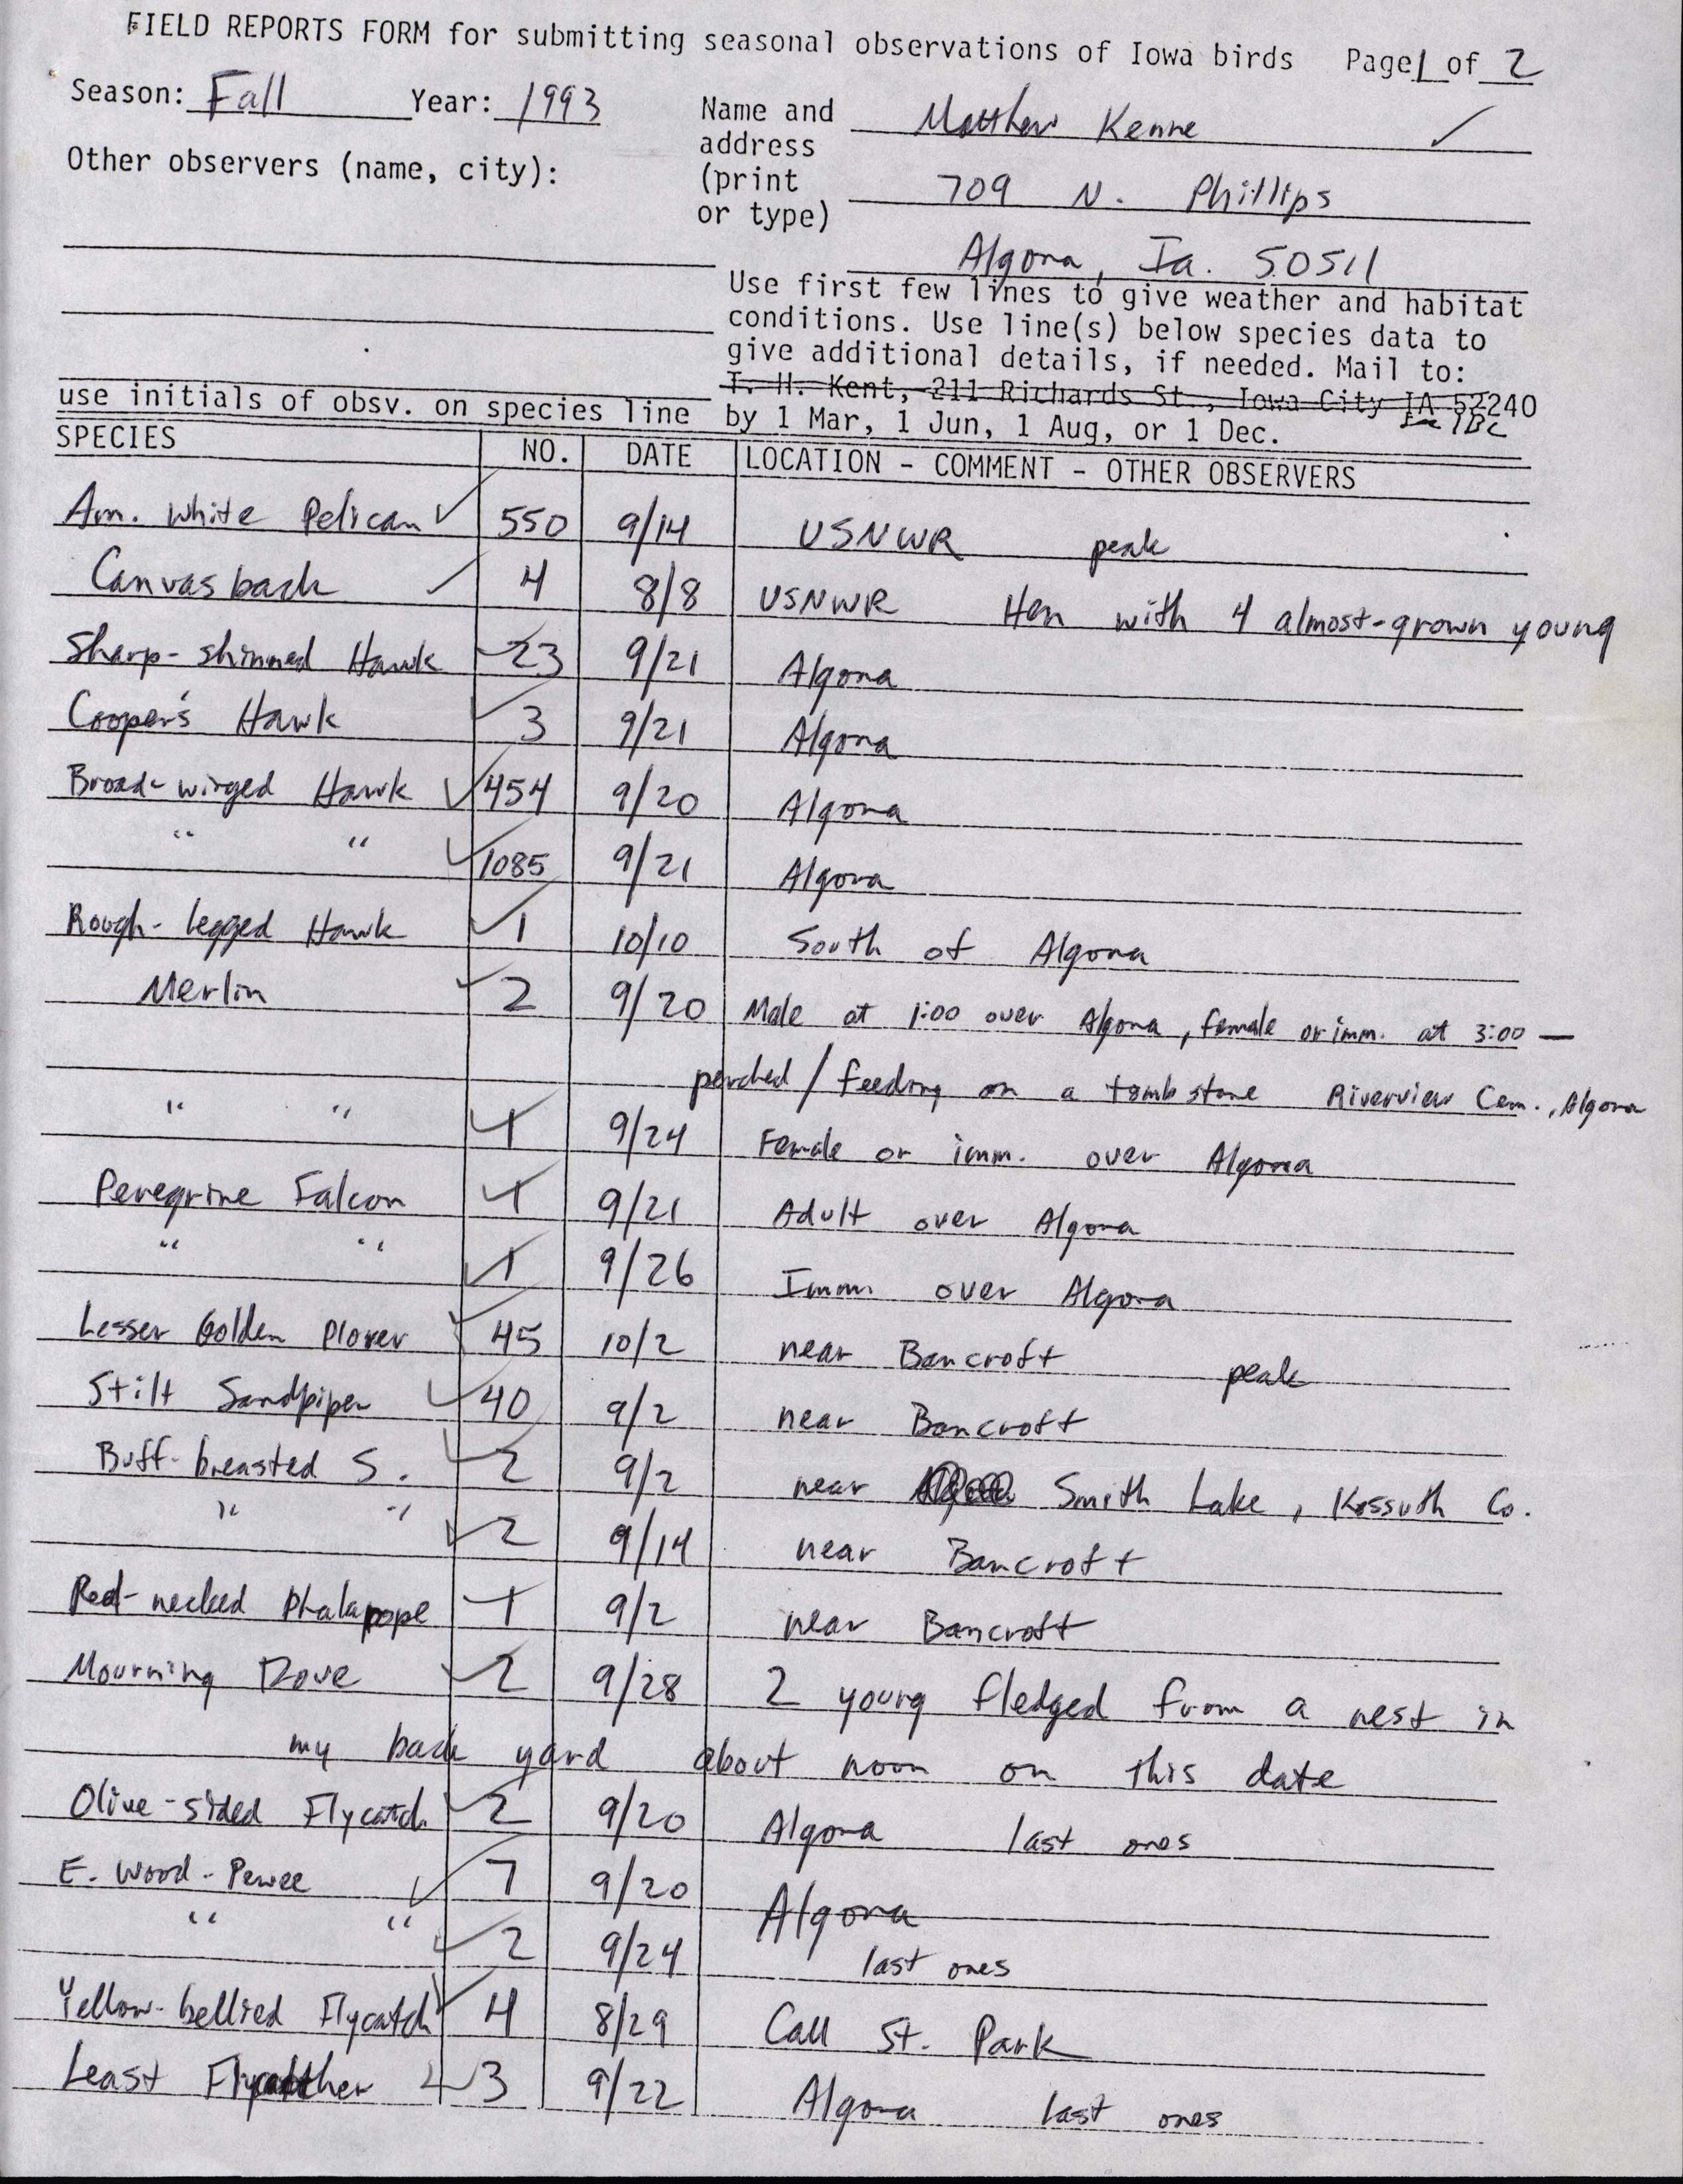 Field reports form for submitting seasonal observations of Iowa birds, Matthew Kenne, fall 1993